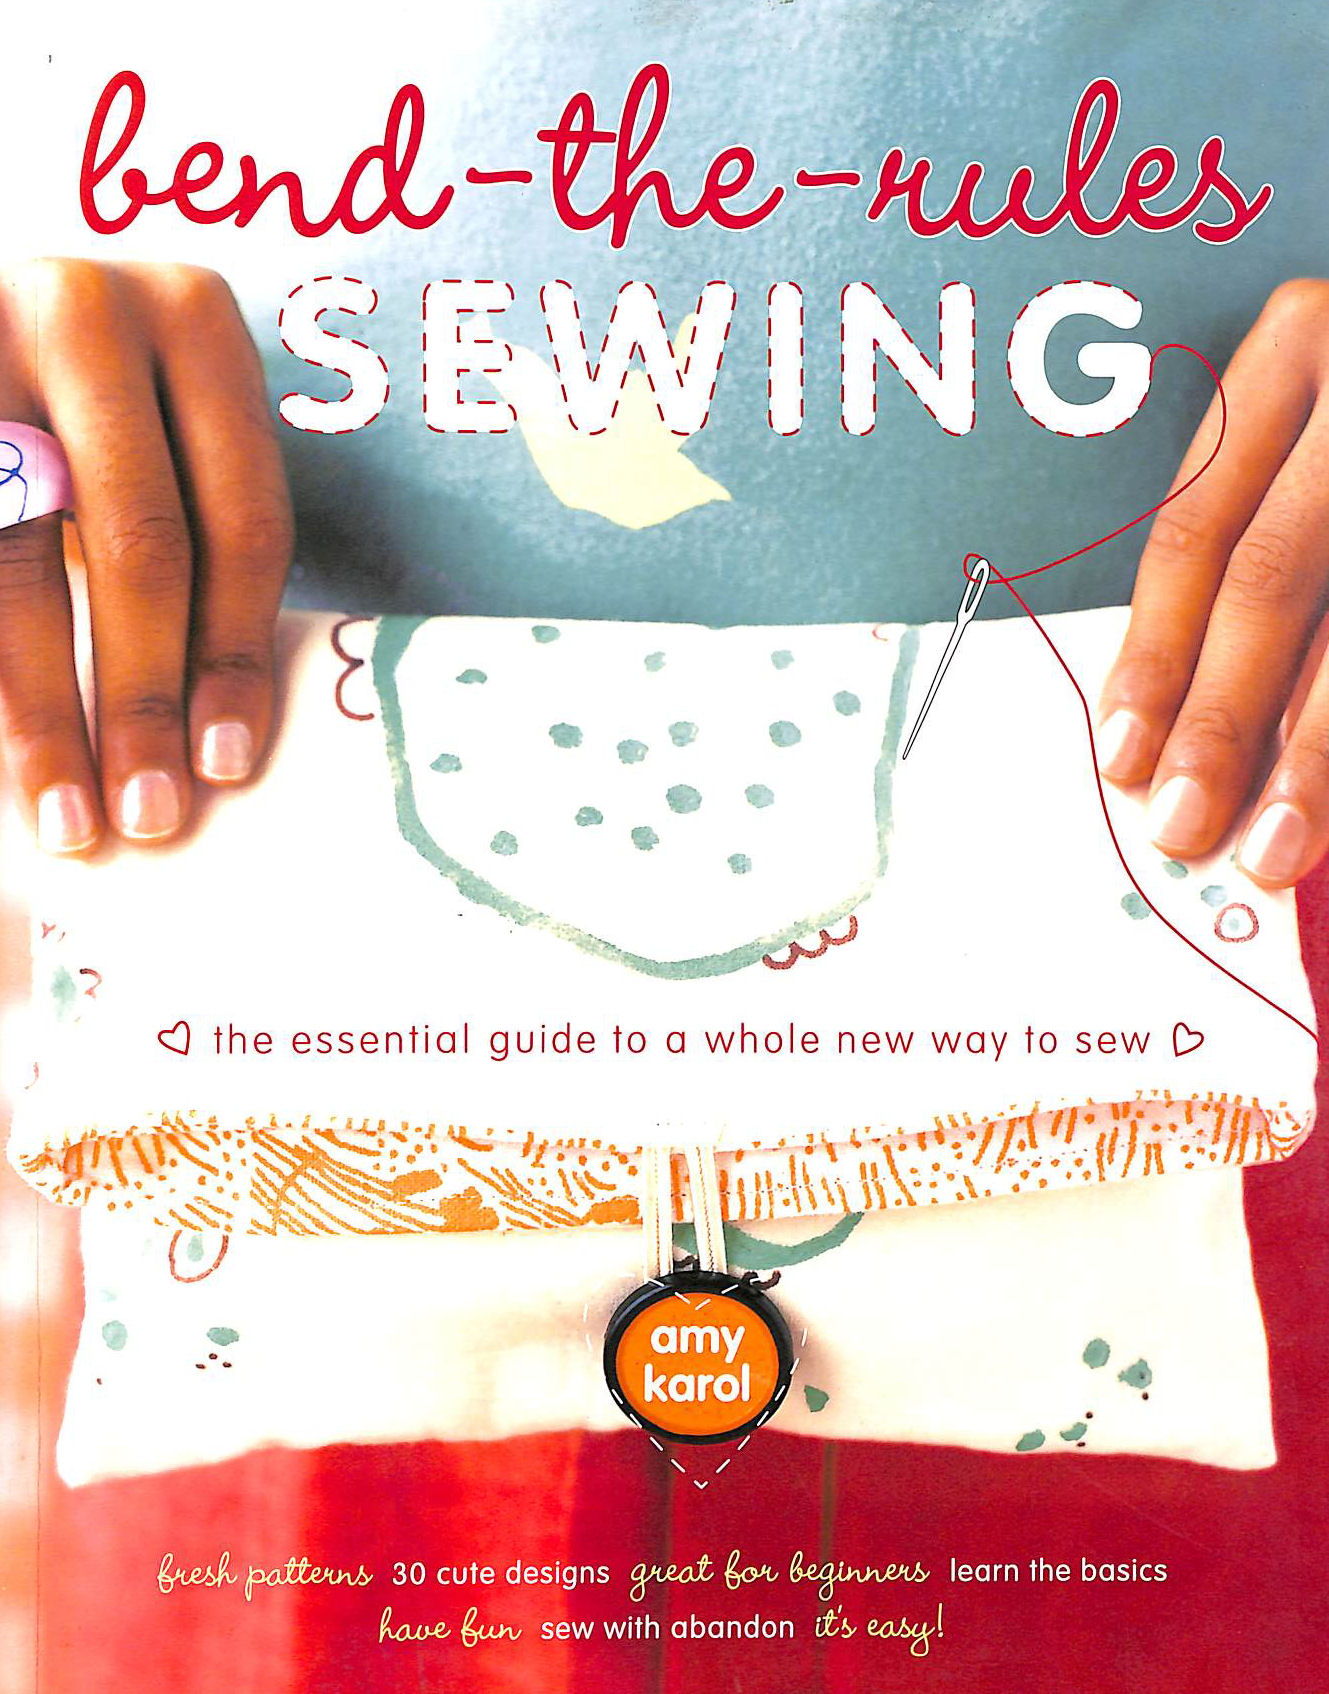 AMY KAROL - Bend-the-Rules Sewing